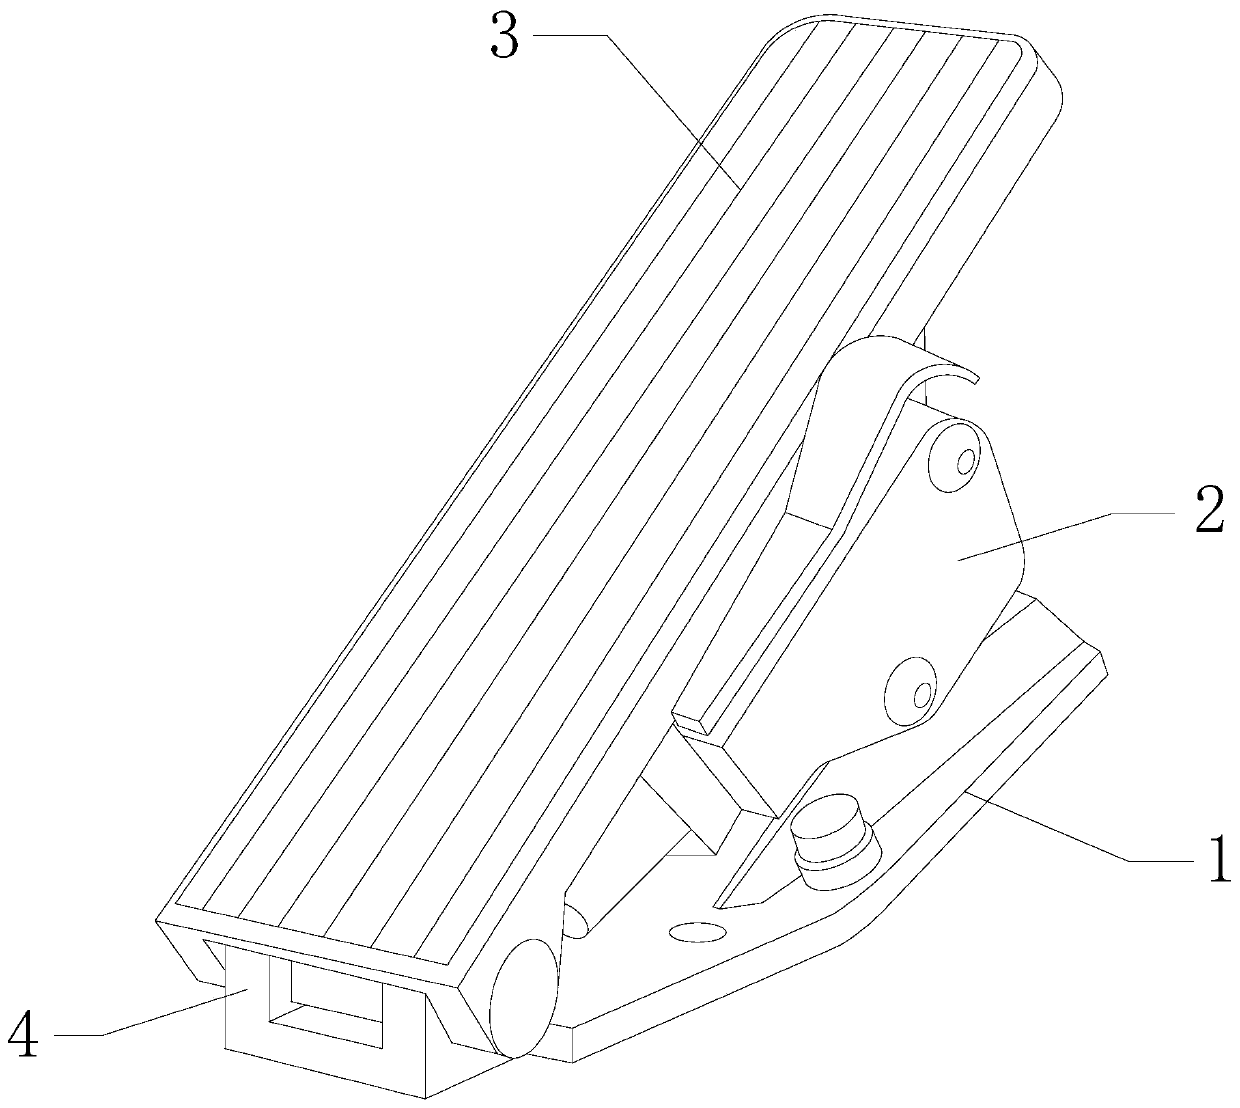 Brake pedal of construction machinery for preventing slip by blowing with air bag